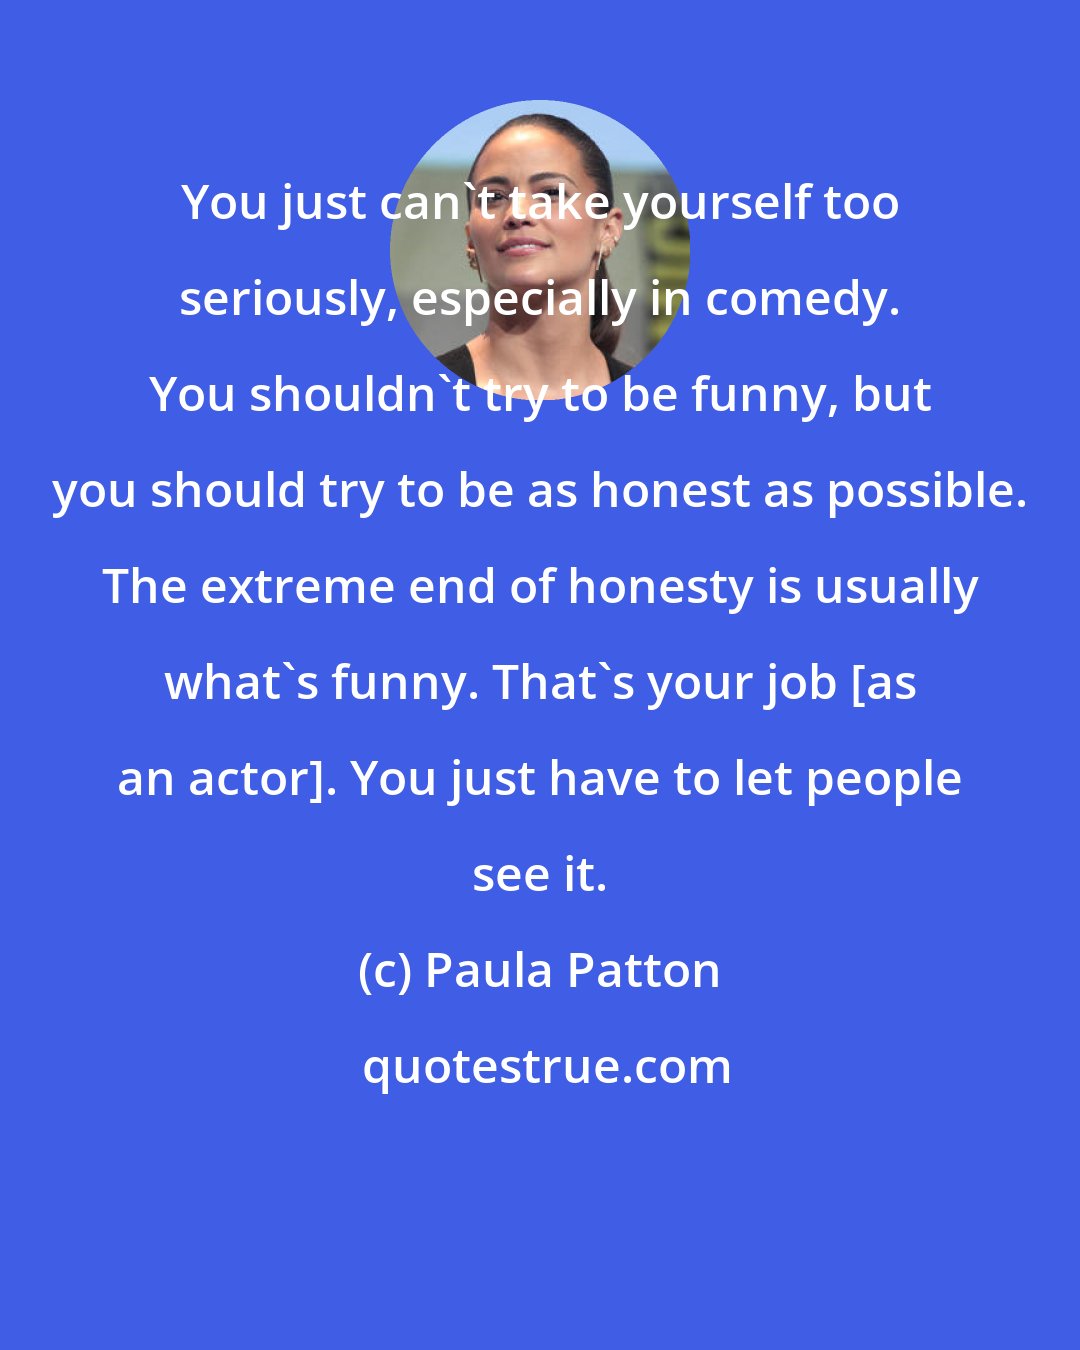 Paula Patton: You just can't take yourself too seriously, especially in comedy. You shouldn't try to be funny, but you should try to be as honest as possible. The extreme end of honesty is usually what's funny. That's your job [as an actor]. You just have to let people see it.